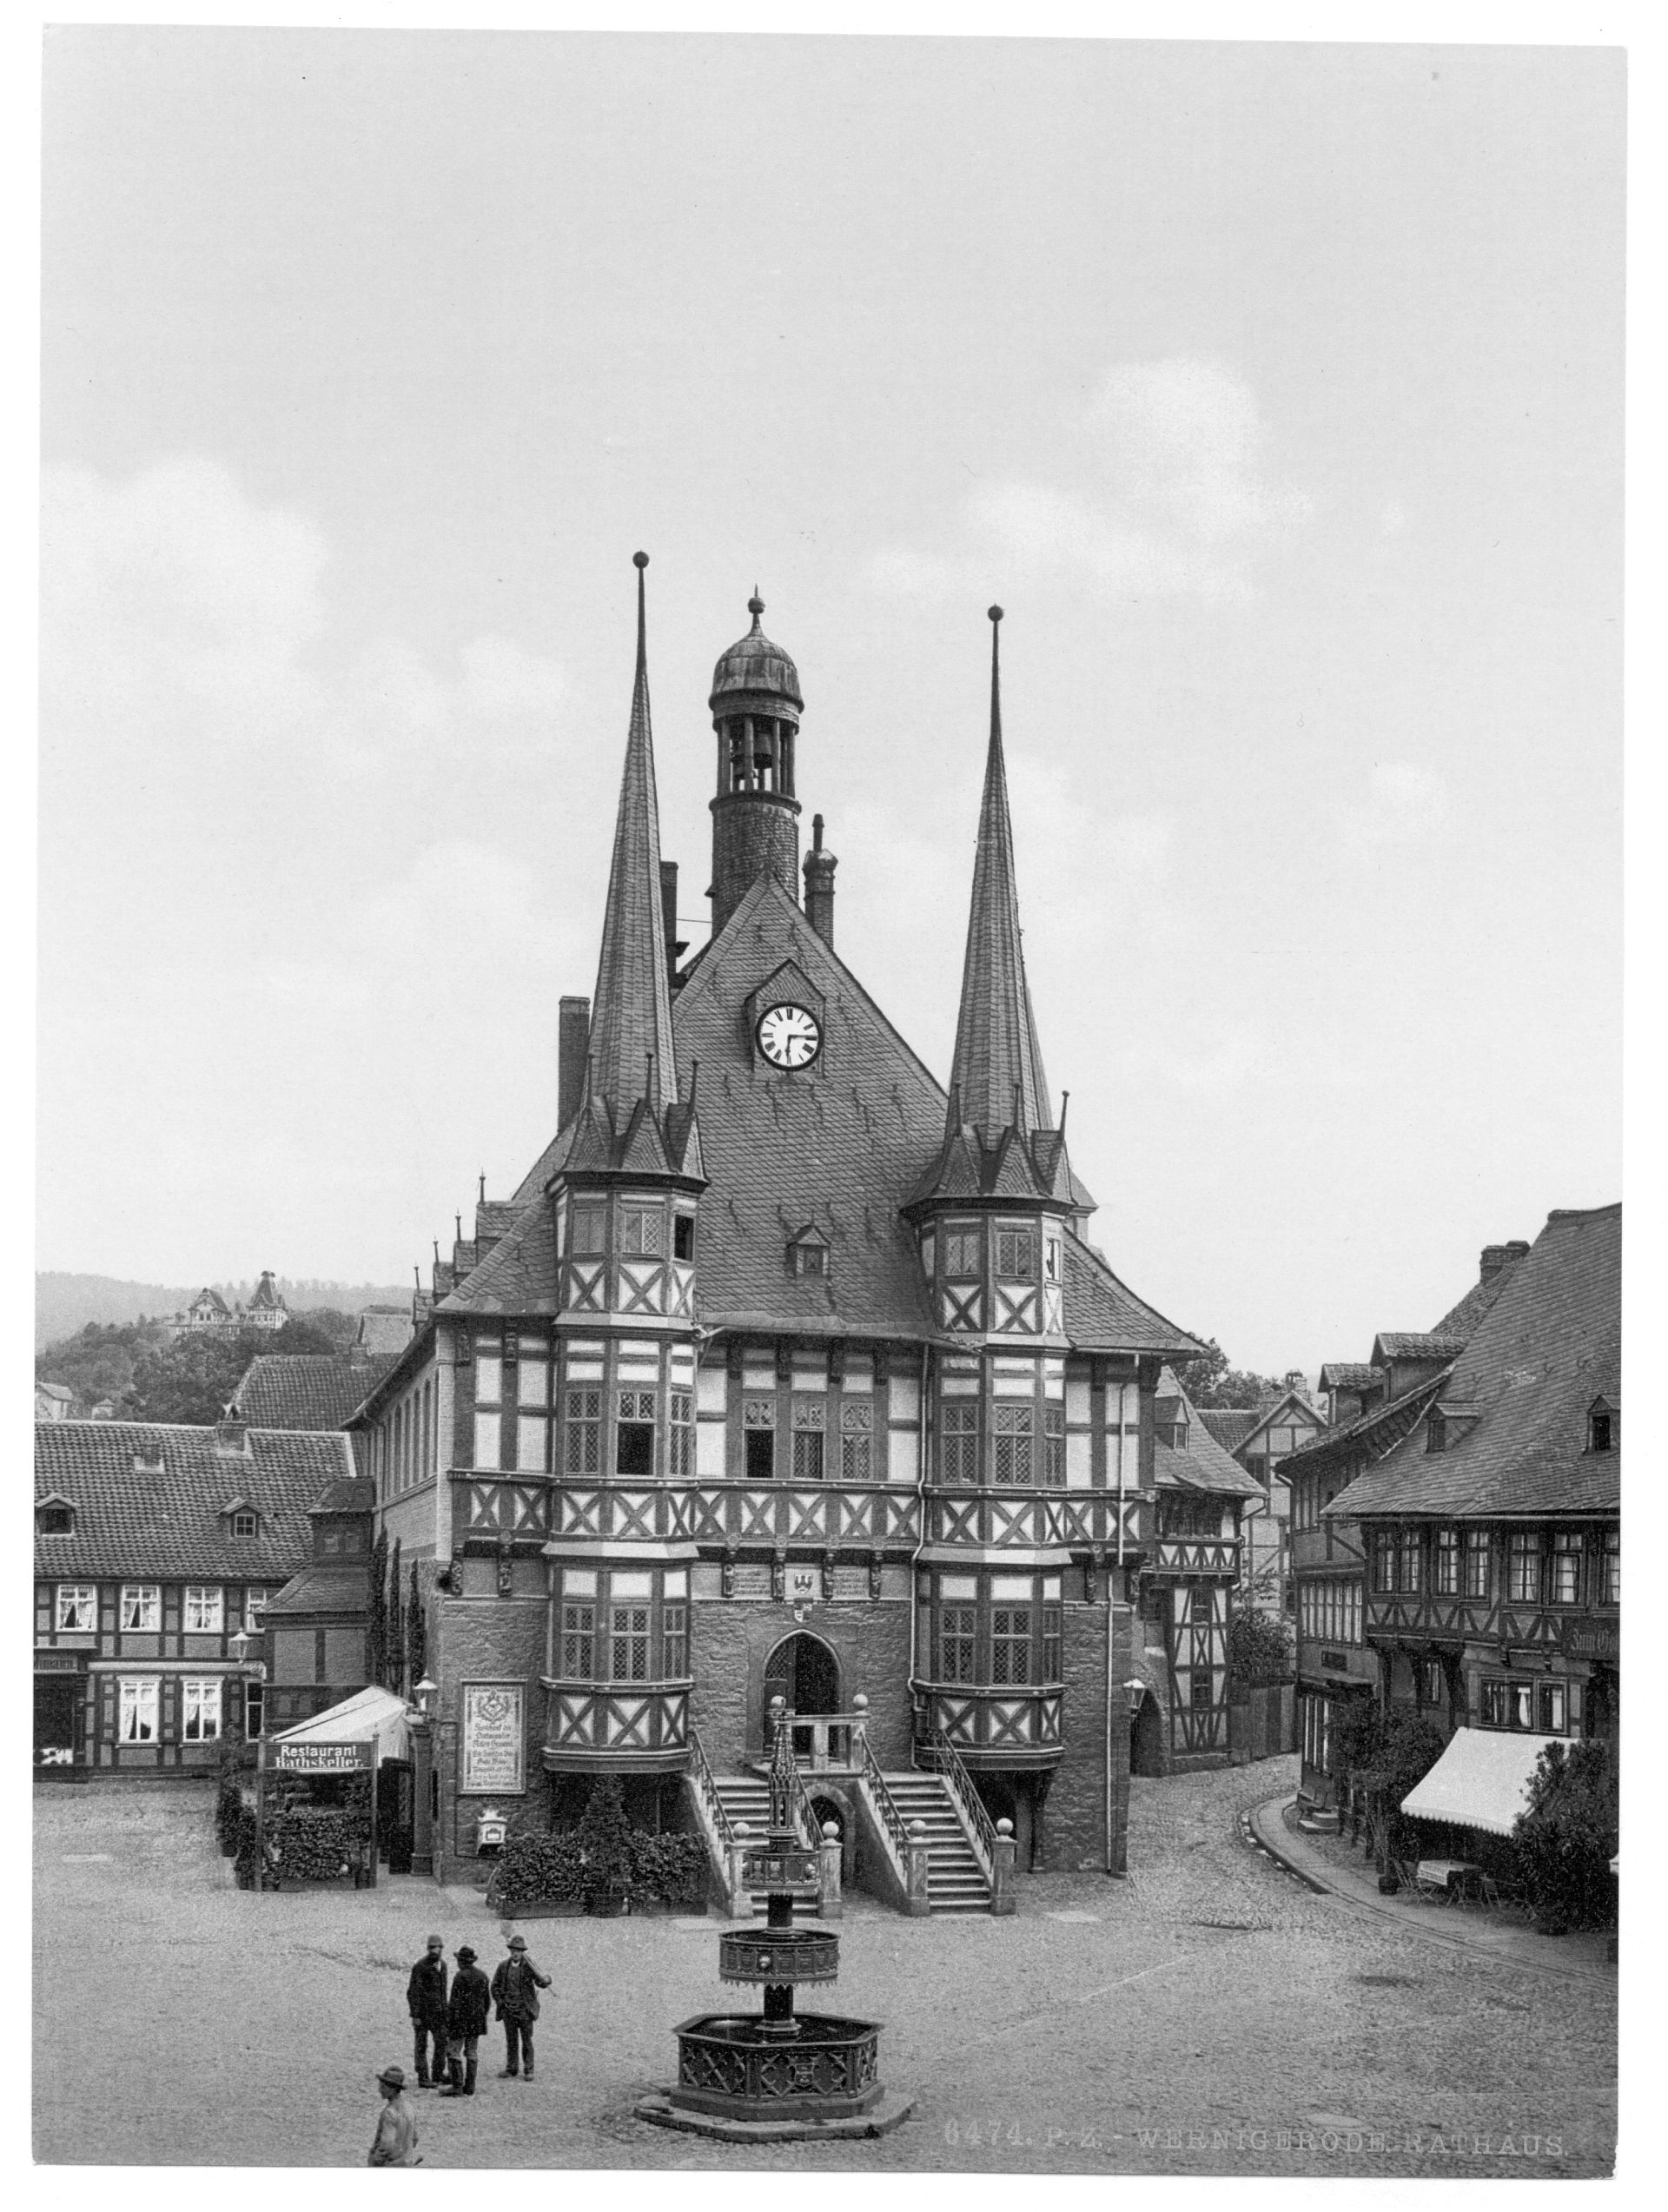 The town hall, Wernigerode, Hartz, Germany